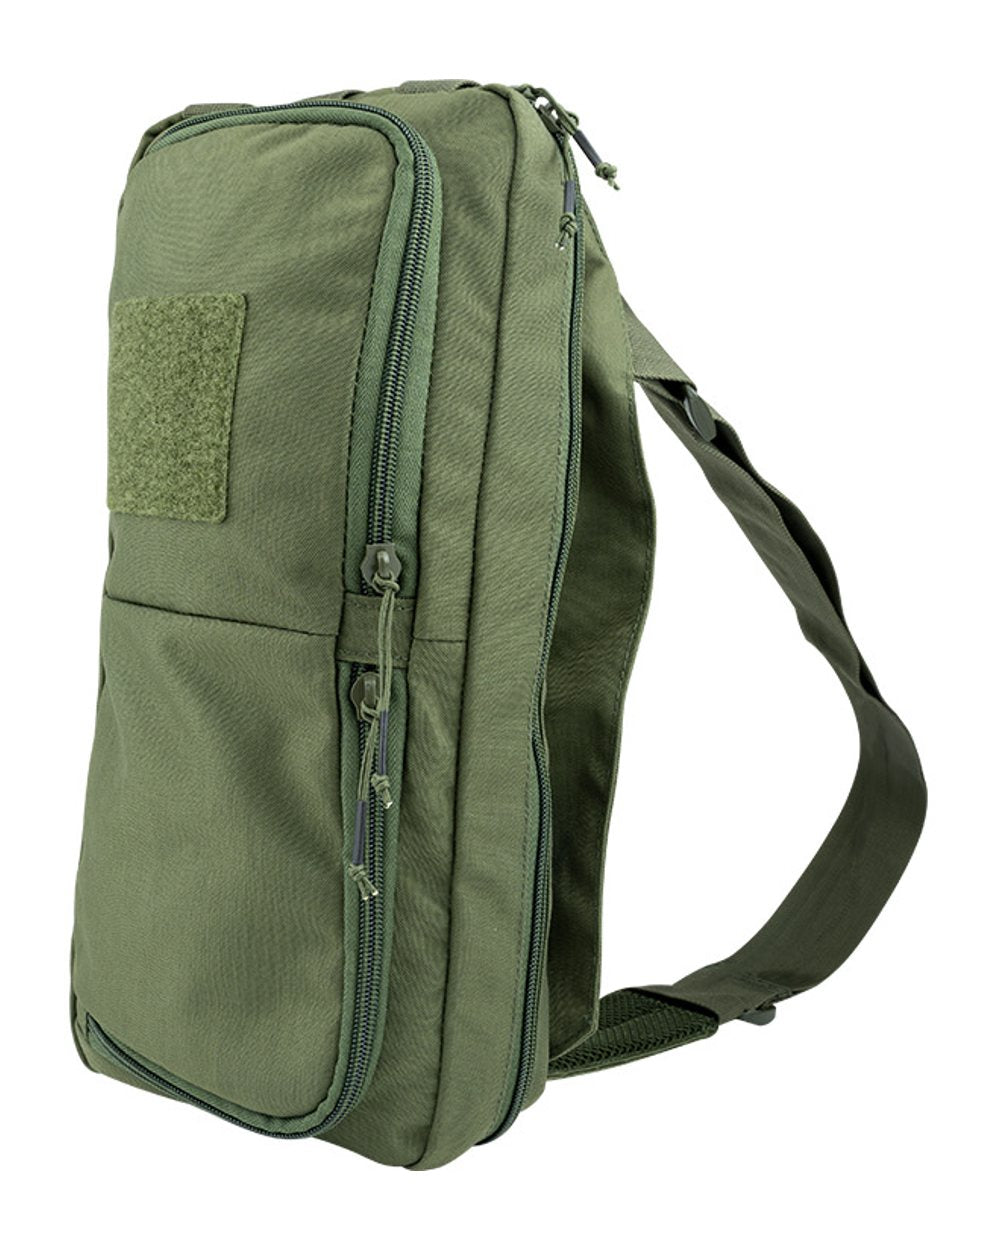 Viper VX Buckle Up Sling Pack in Green 